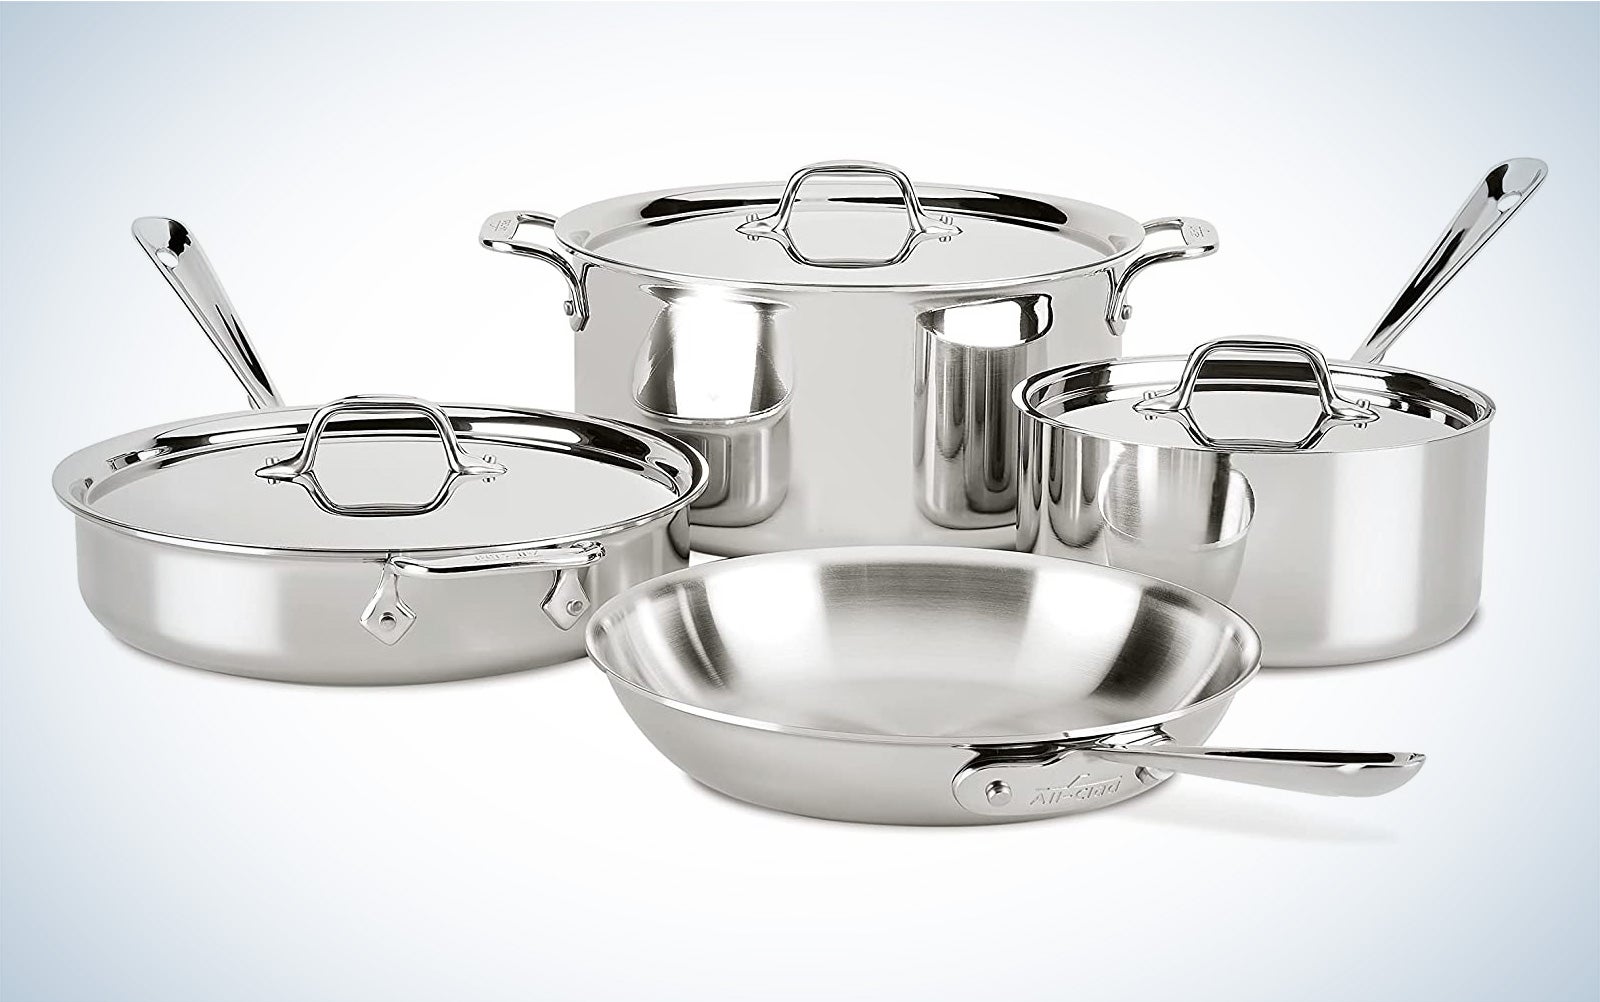 All-clad induction cookware on a plain background